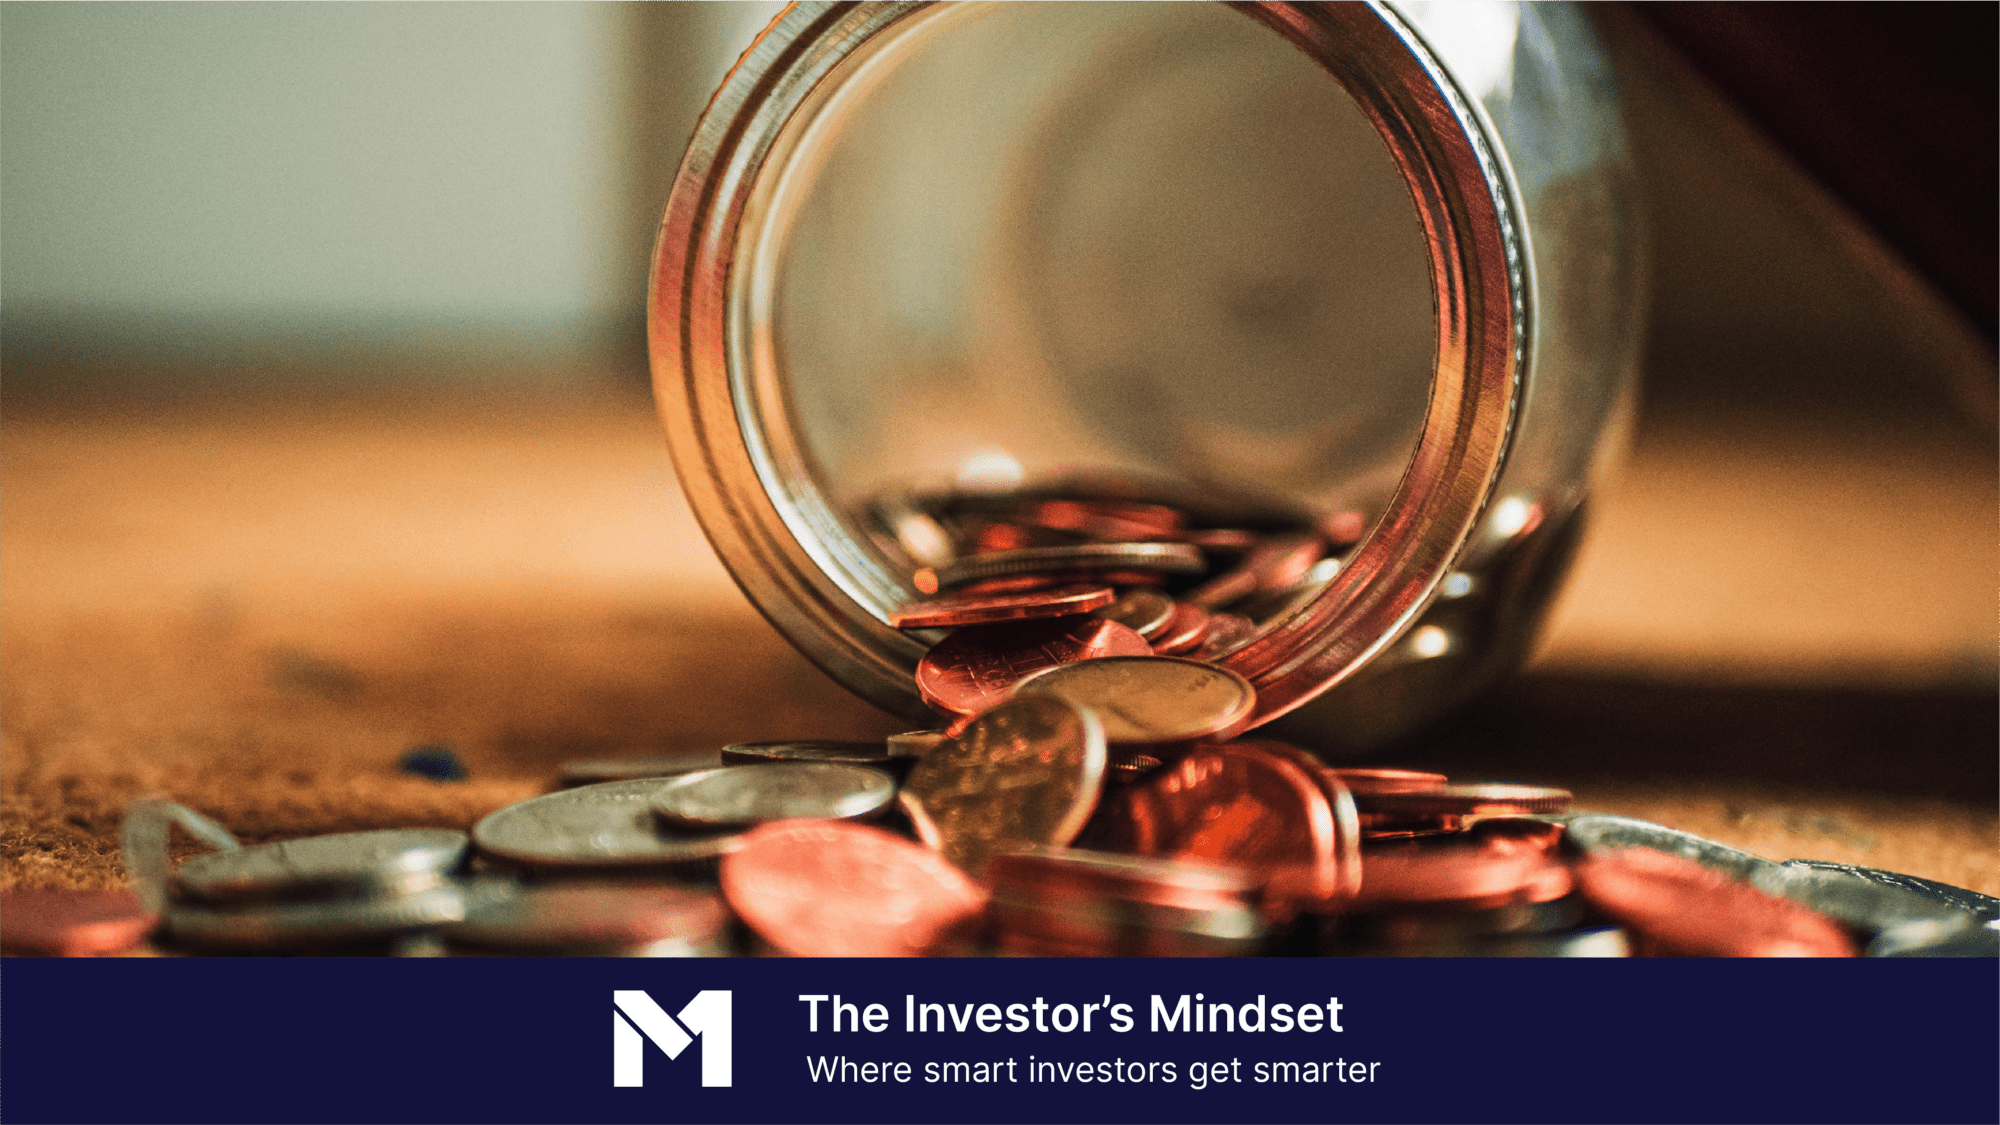 Image of coins spilling out of a glass jar with the banner "The Investor's Mindset, Where smart investor's get smarter"